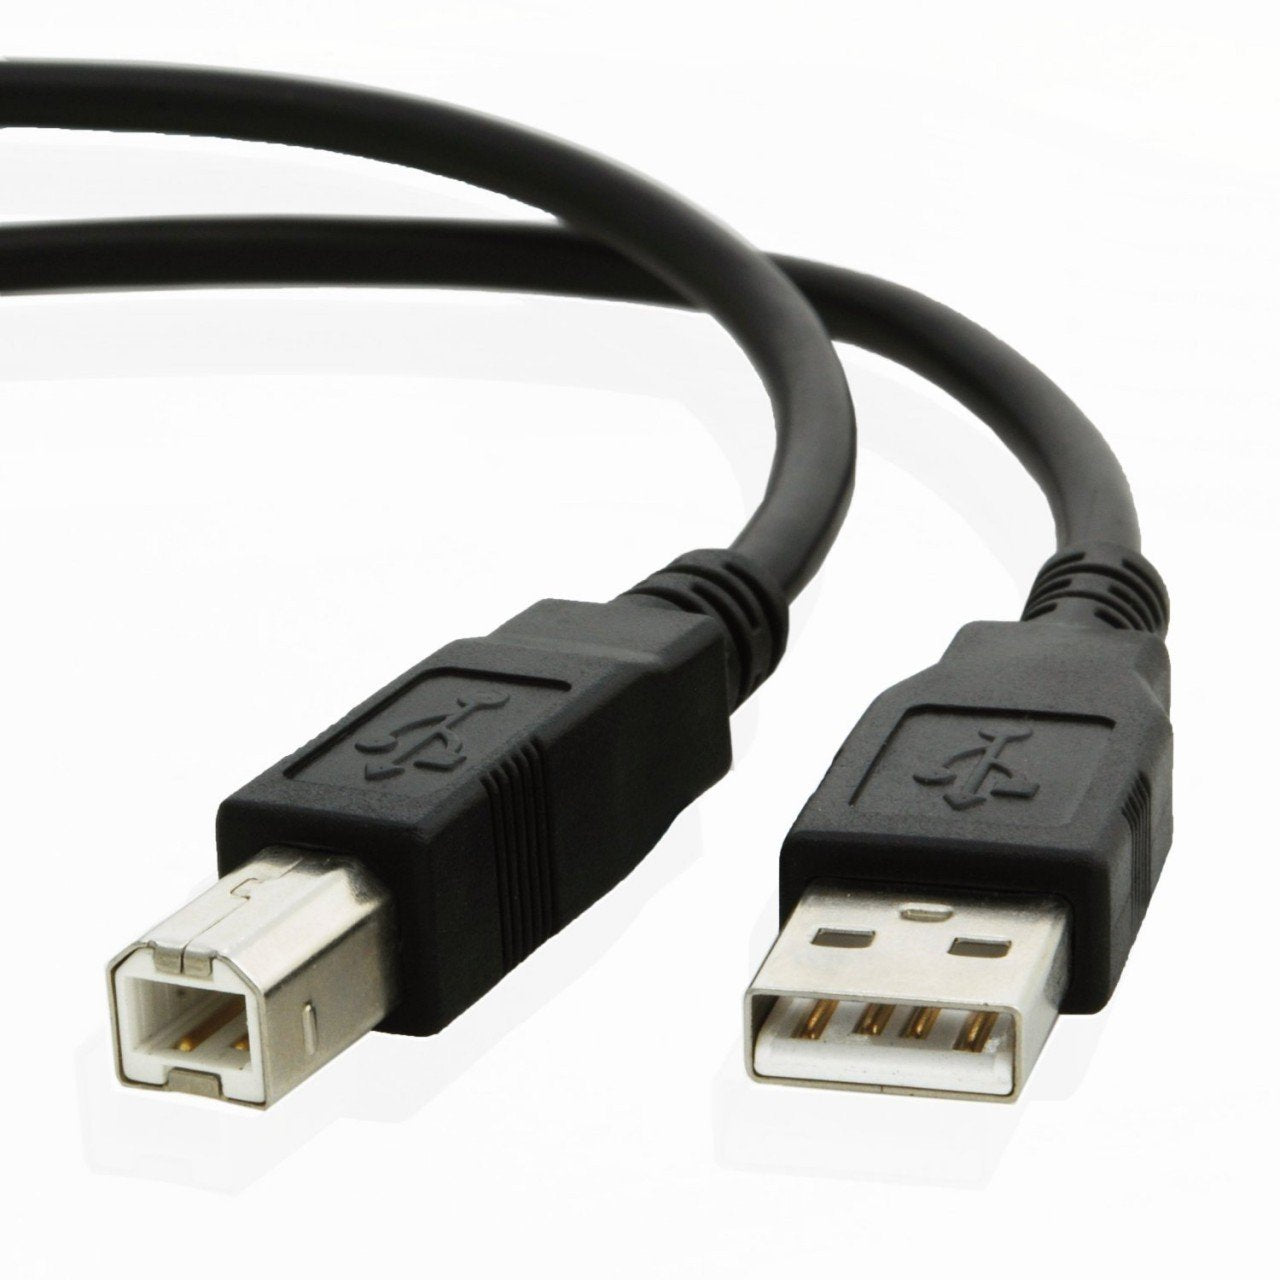 USB cable for Canon PIXMA MG2250